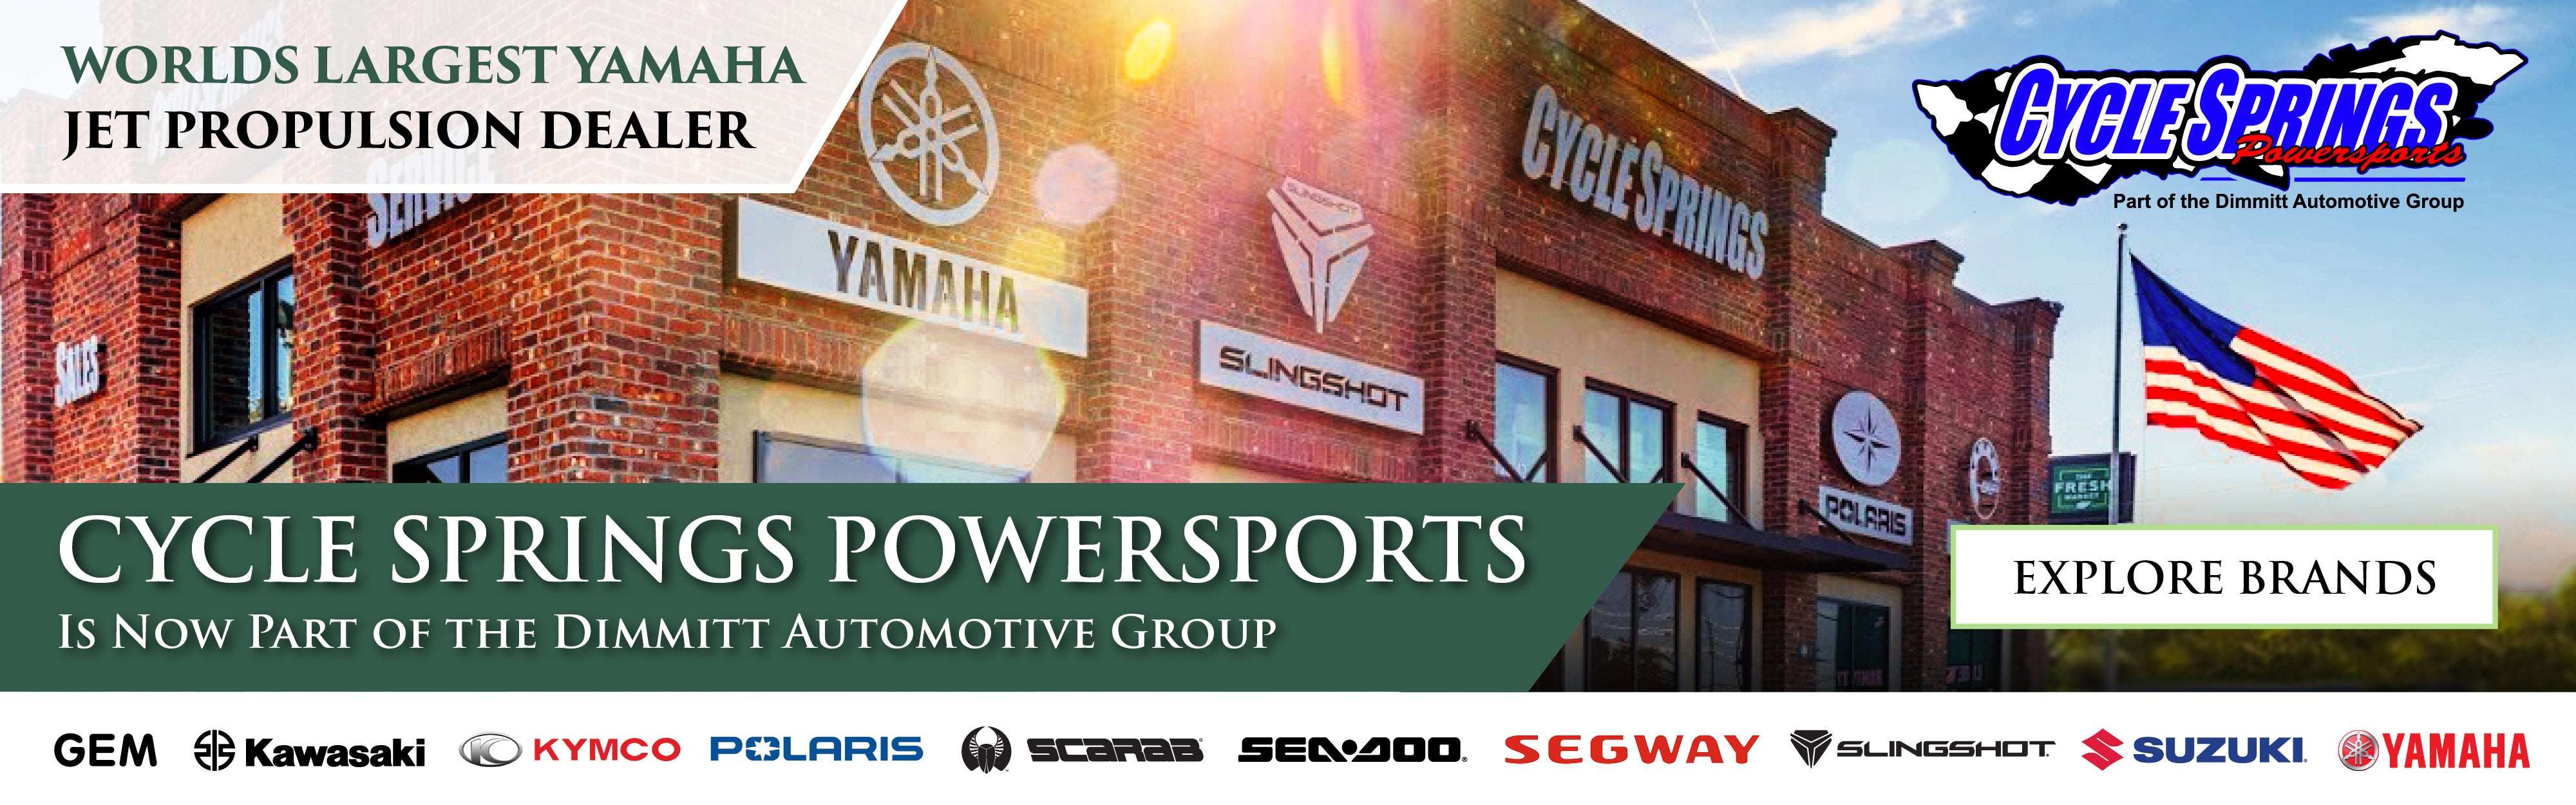 Cycle Springs Powersports is Now Part of the Dimmitt Automotive Group